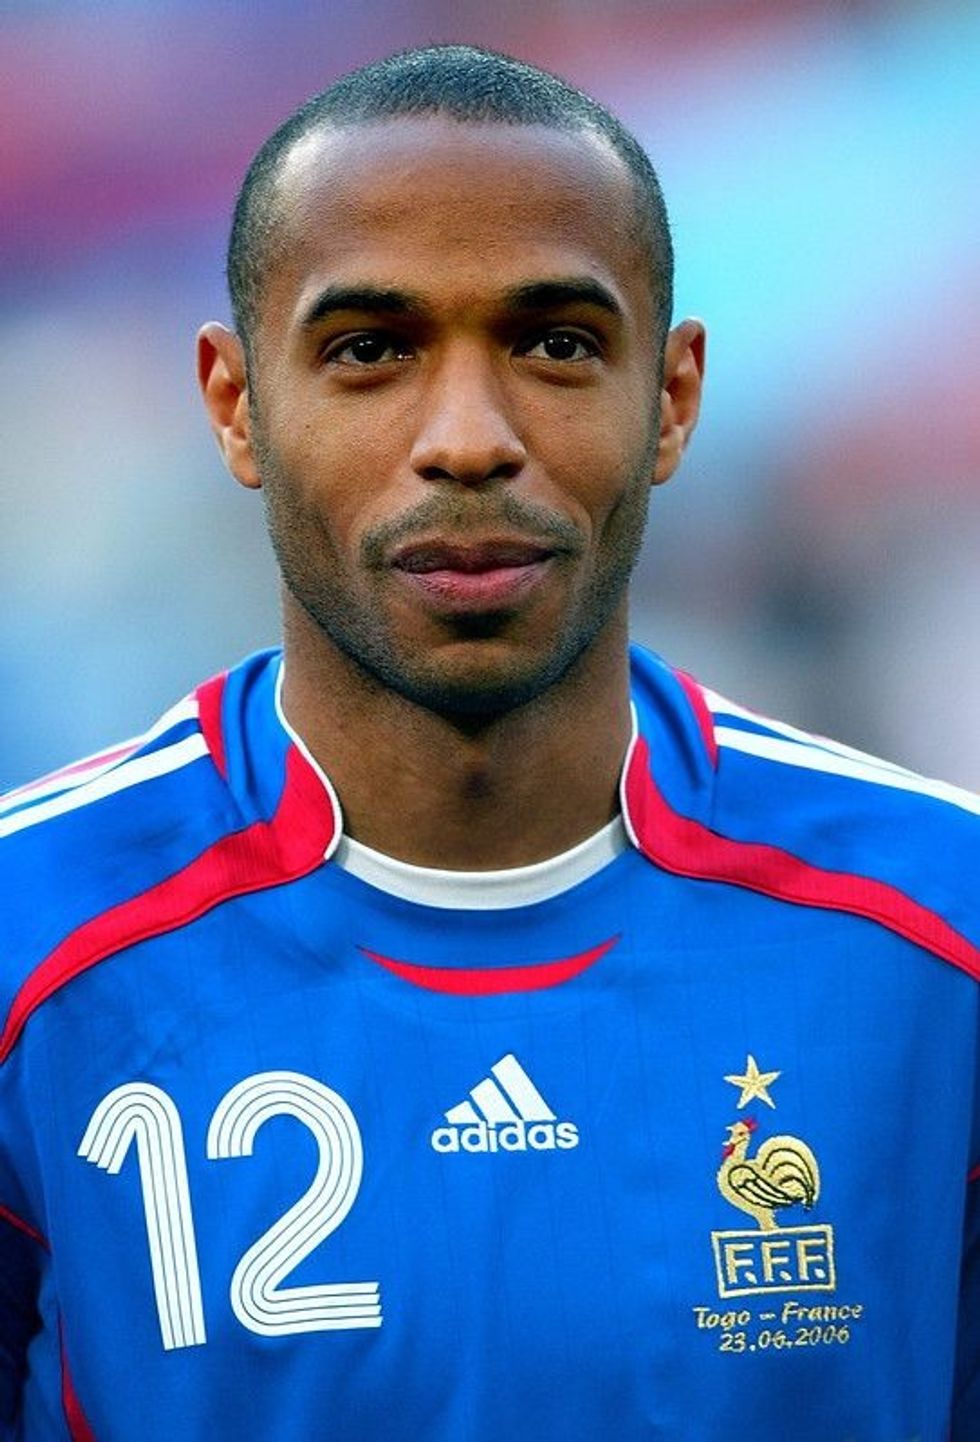 Thierry Henry is considered one of the greatest strikers in the Premier League history.